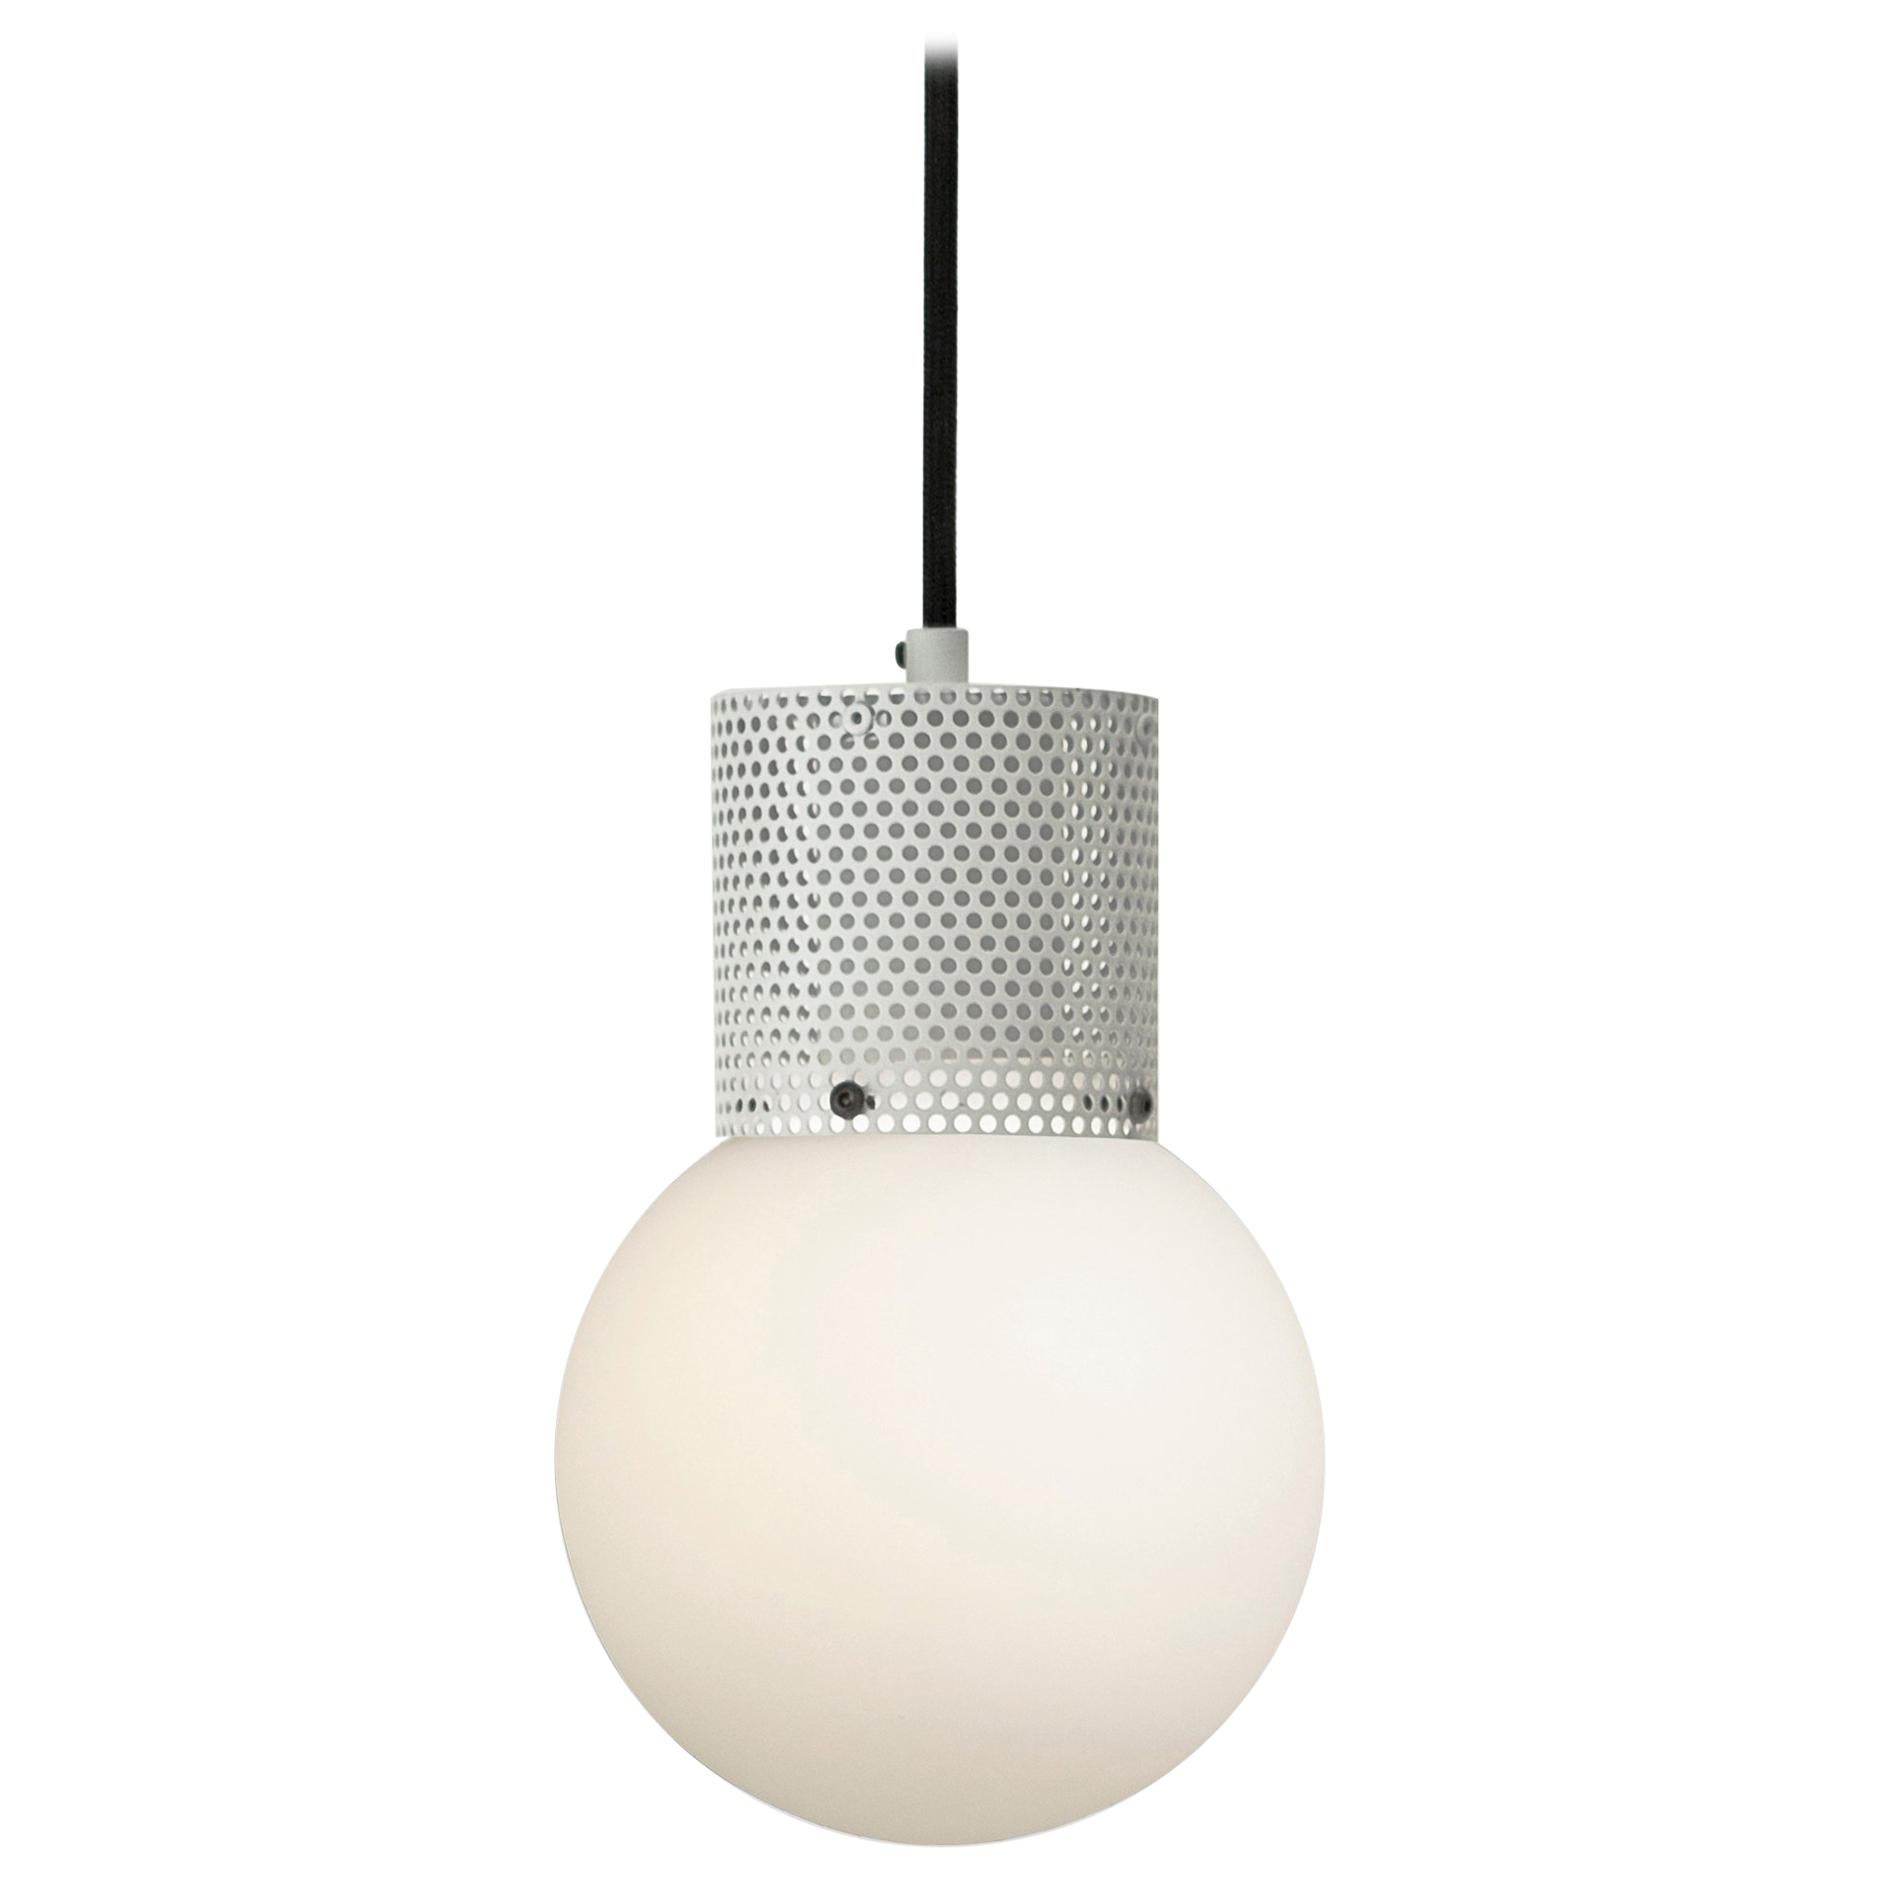 Perf Pendant Light Small Off-White Perforated Tube, Glass Round Orb Shade